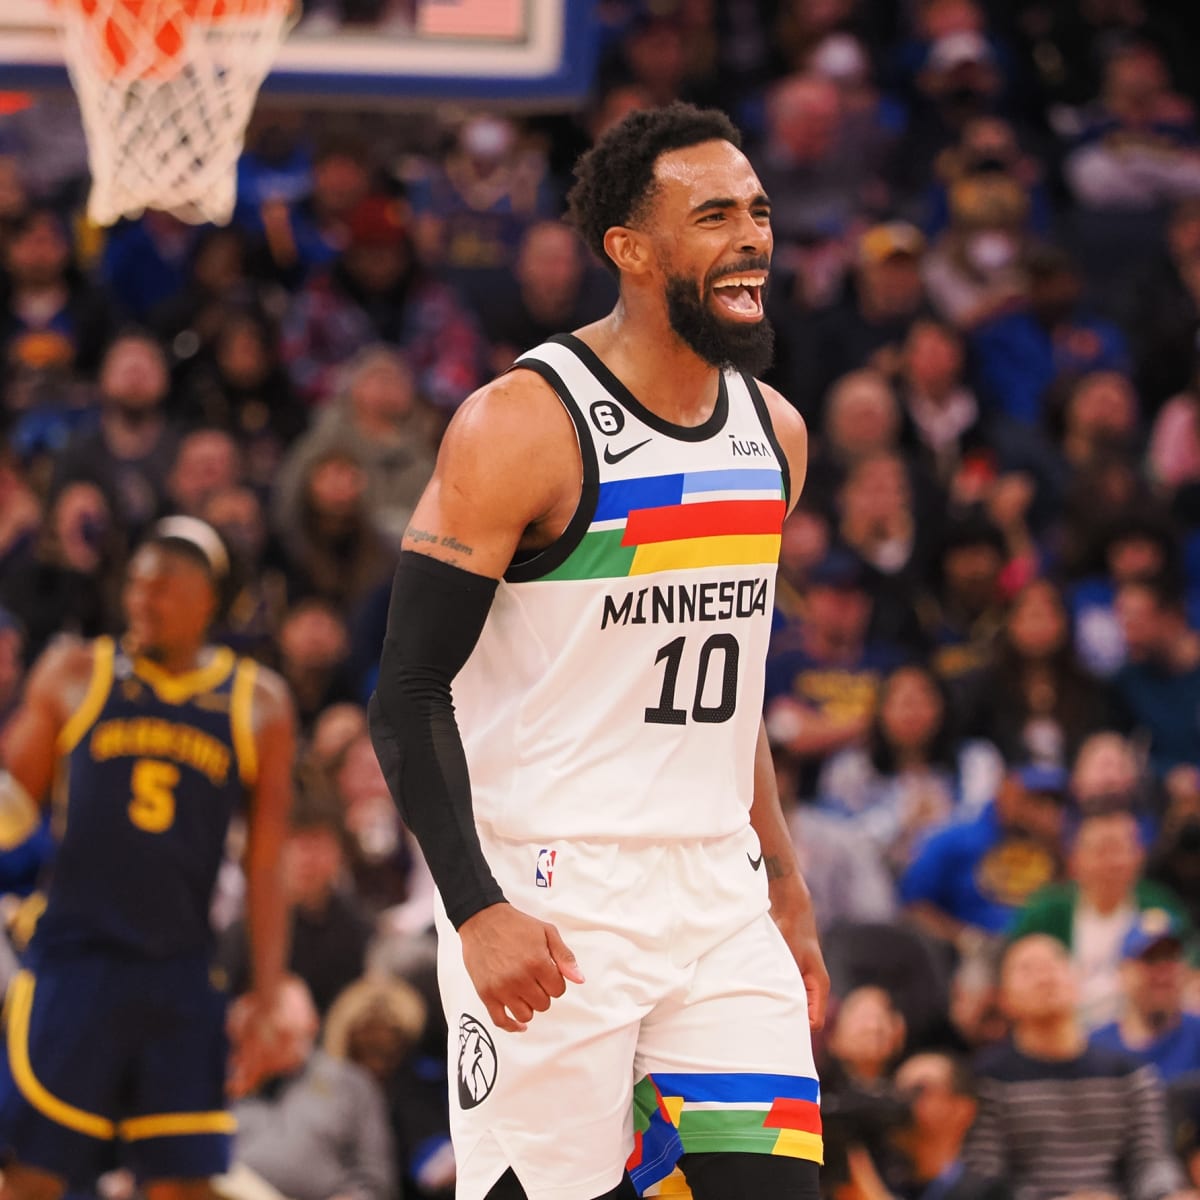 Mike Conley talks about his scoring